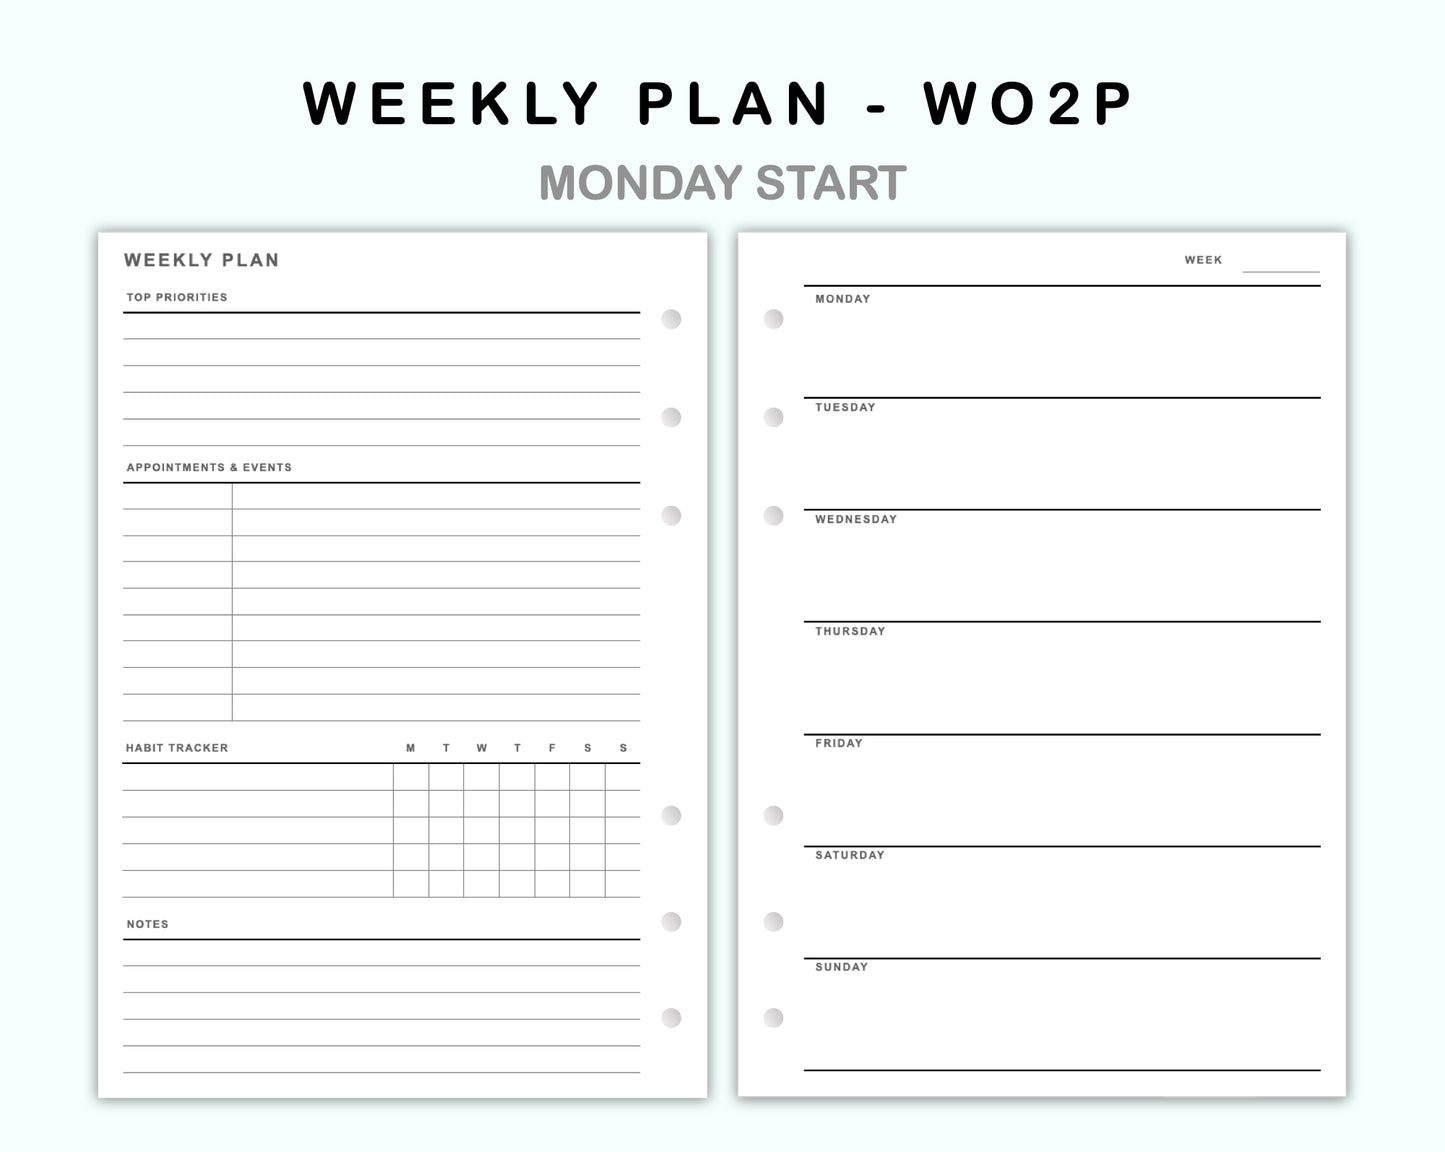 Personal Wide Inserts - Weekly Plan - WO2P - with Habit Tracker